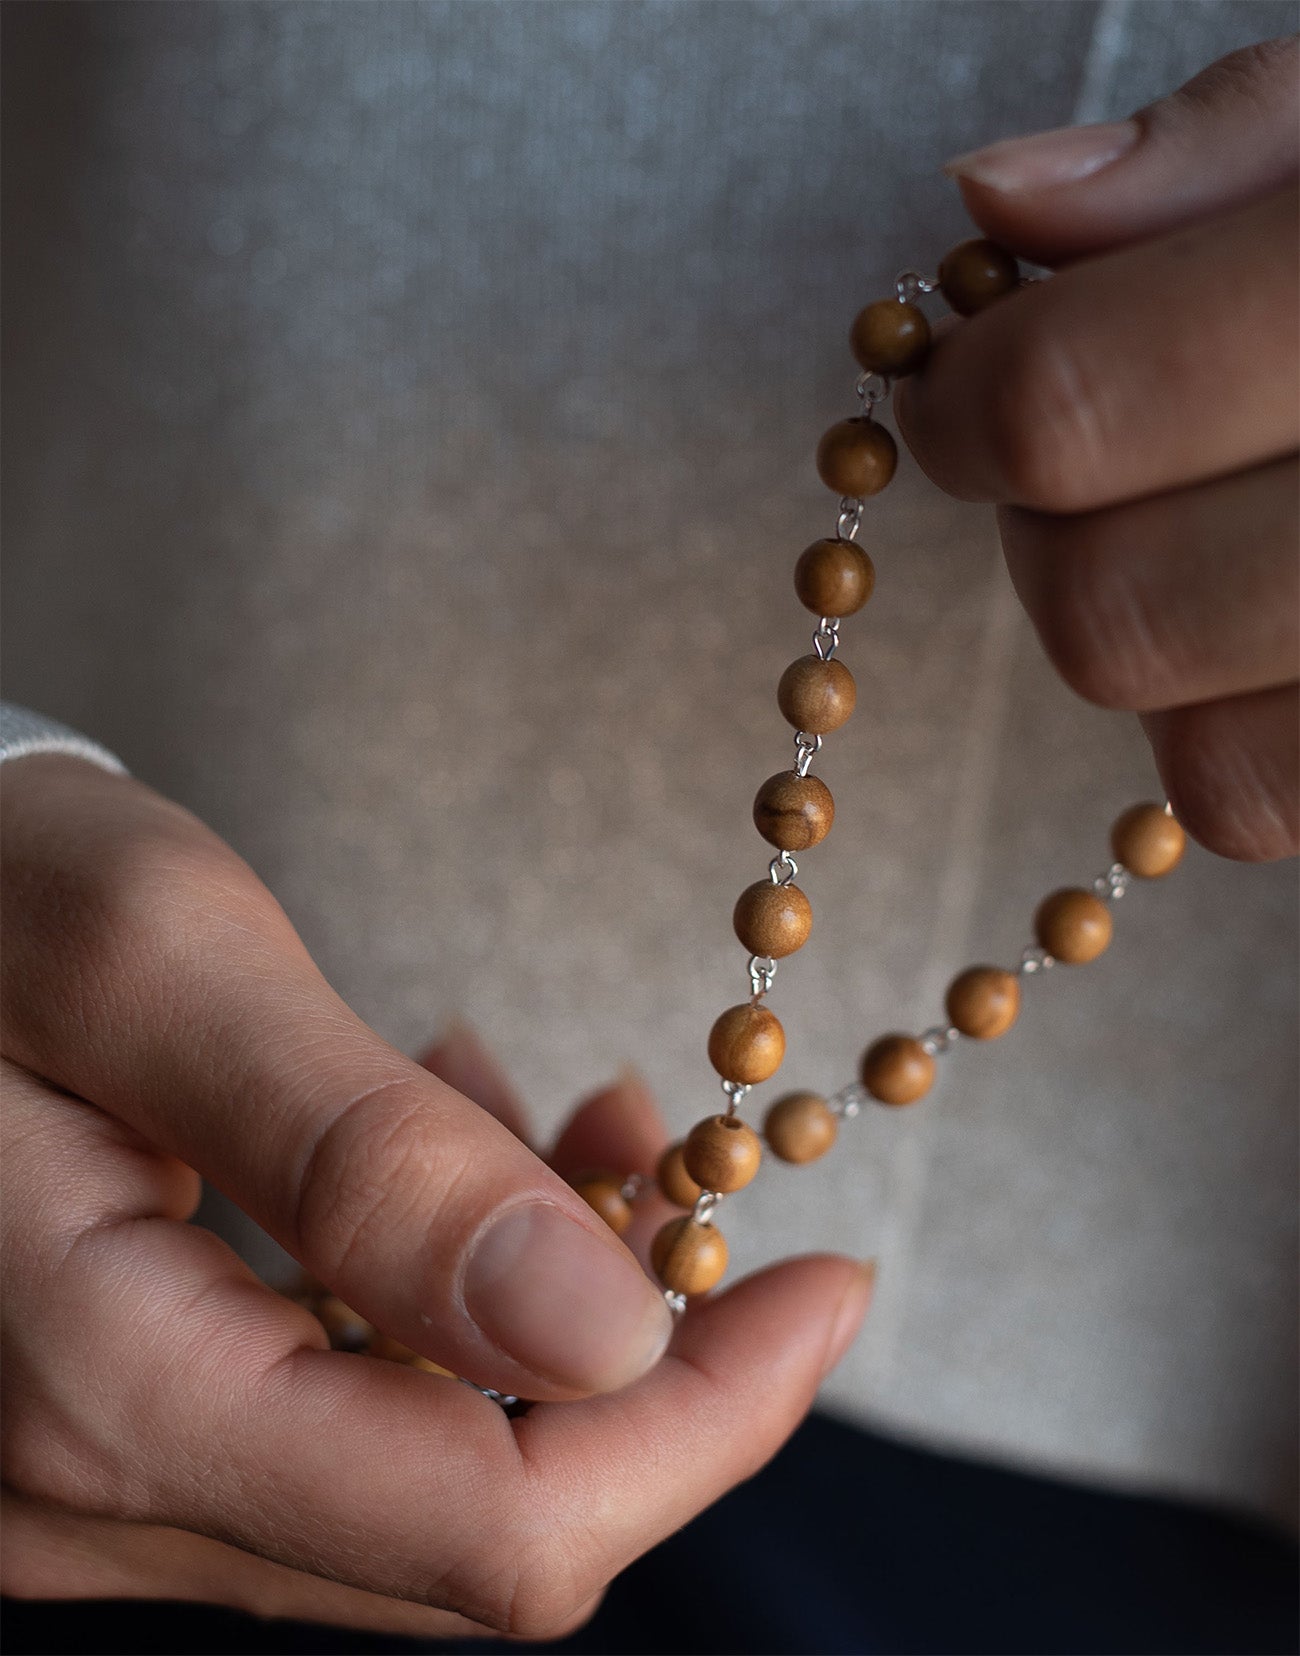 Prayer Beads, 100 olive wood beads with cross